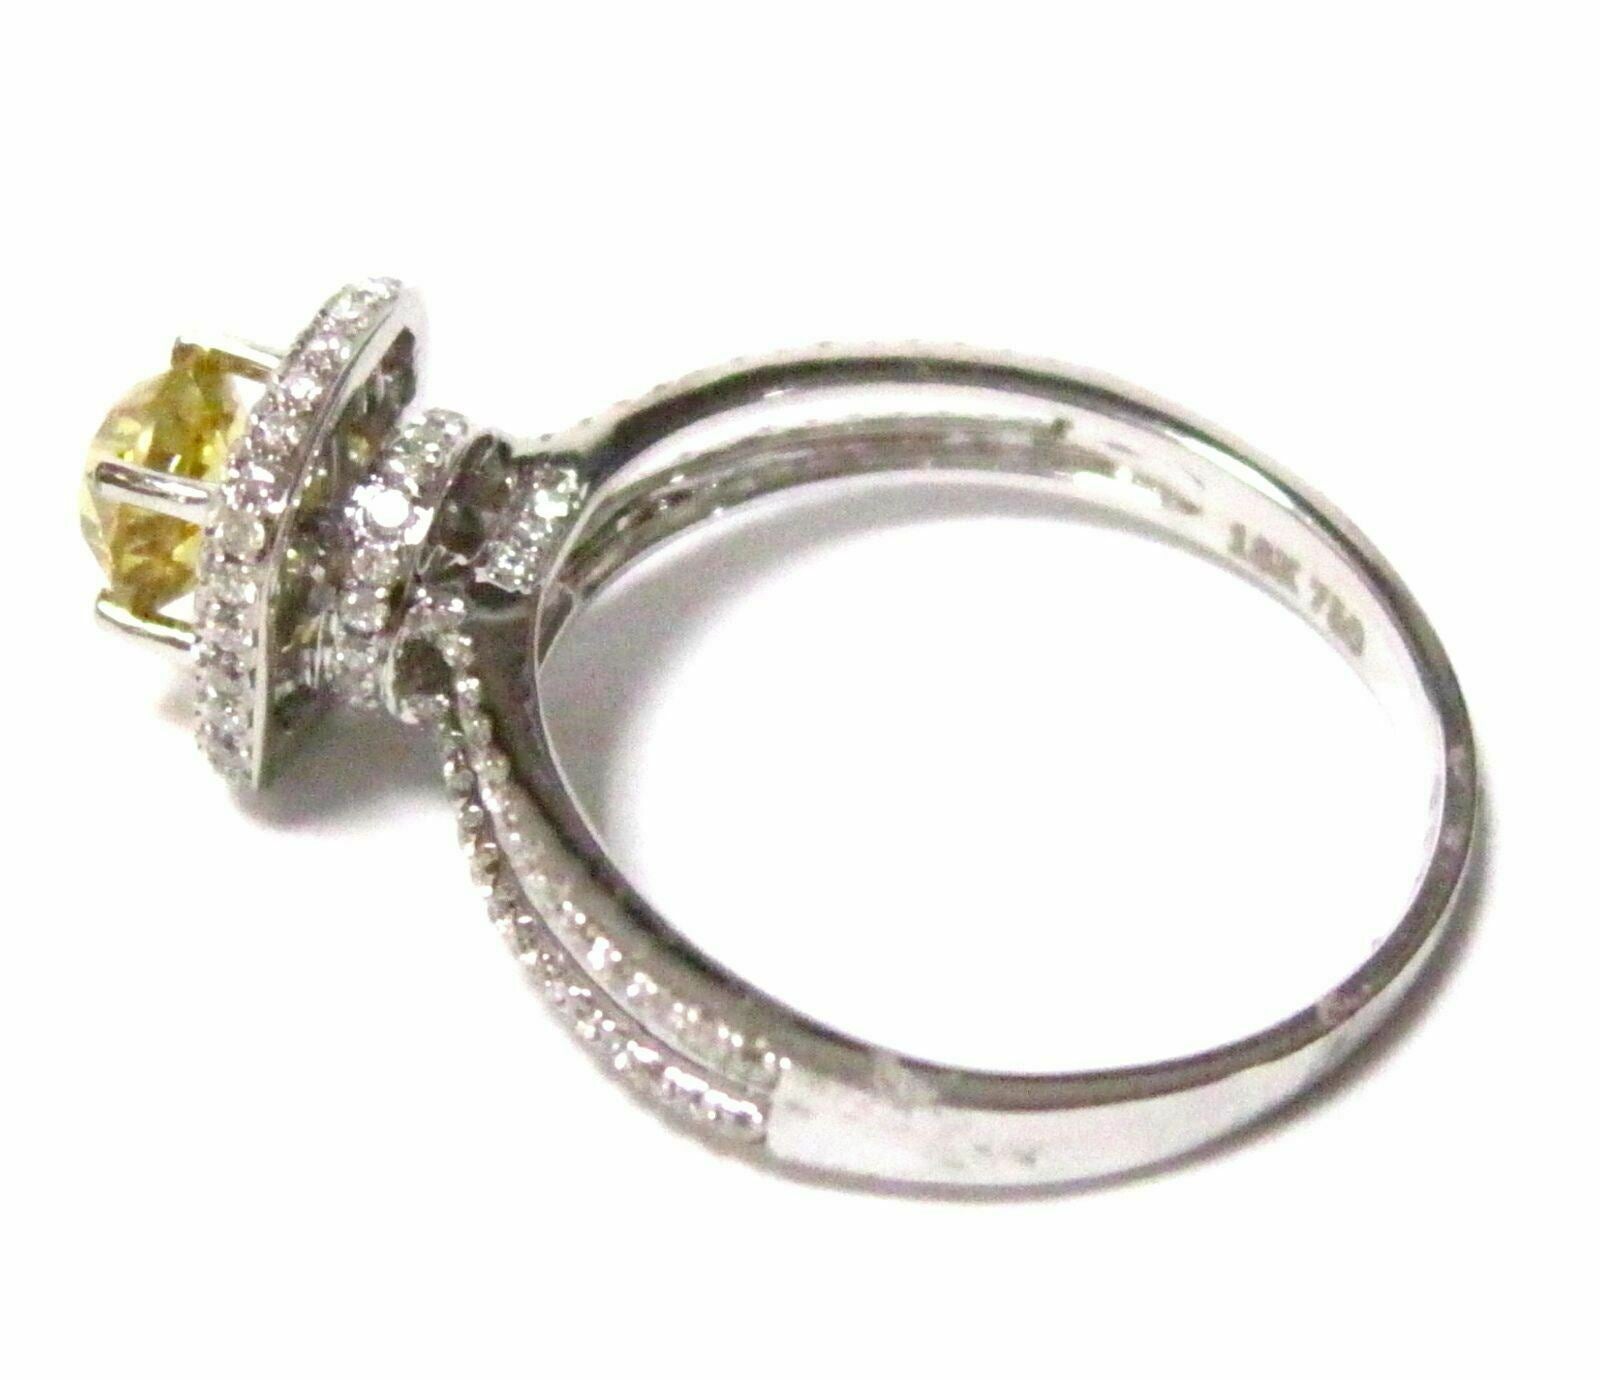 HPHT Fancy Yellow Round Diamond Solitaire Engagement Ring Size 6.5 VVS2 18k WG